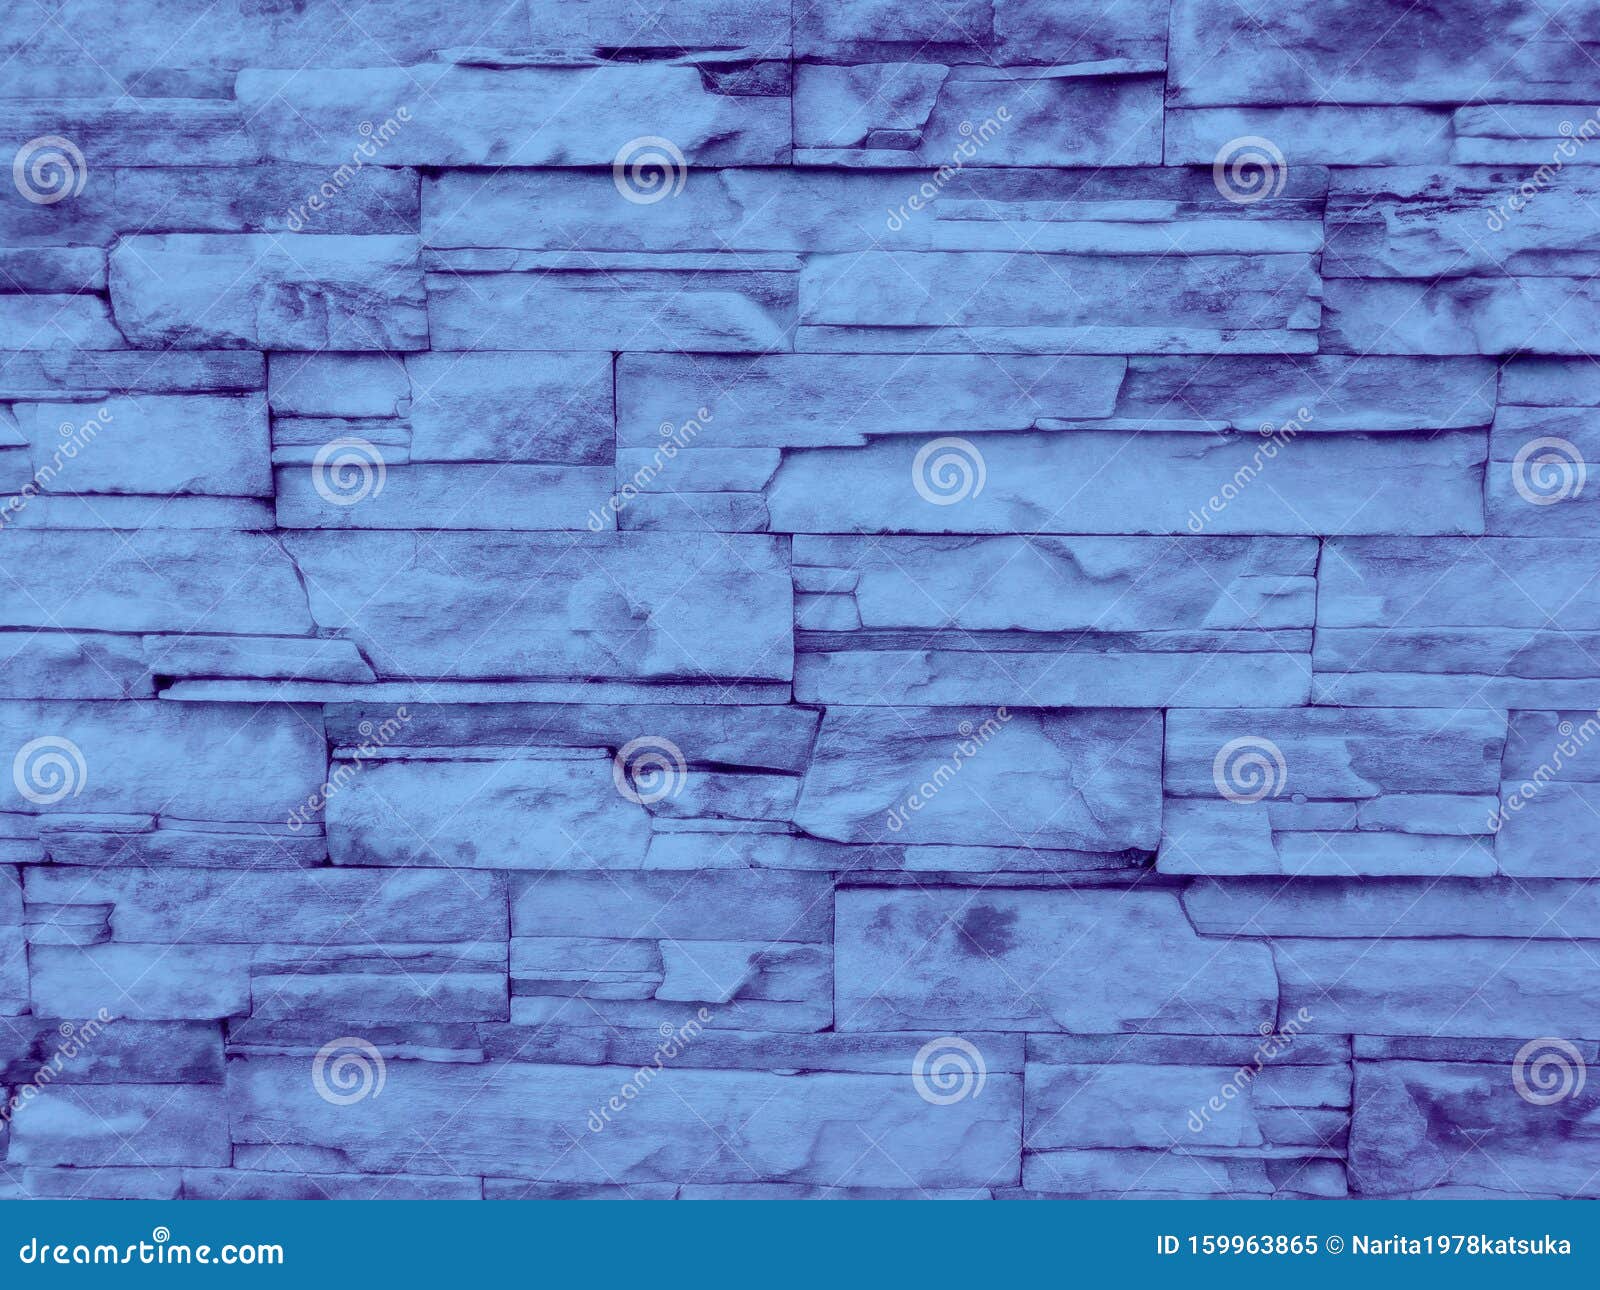 Wall Cement Light Blue Color Background and Texture Stock Image - Image